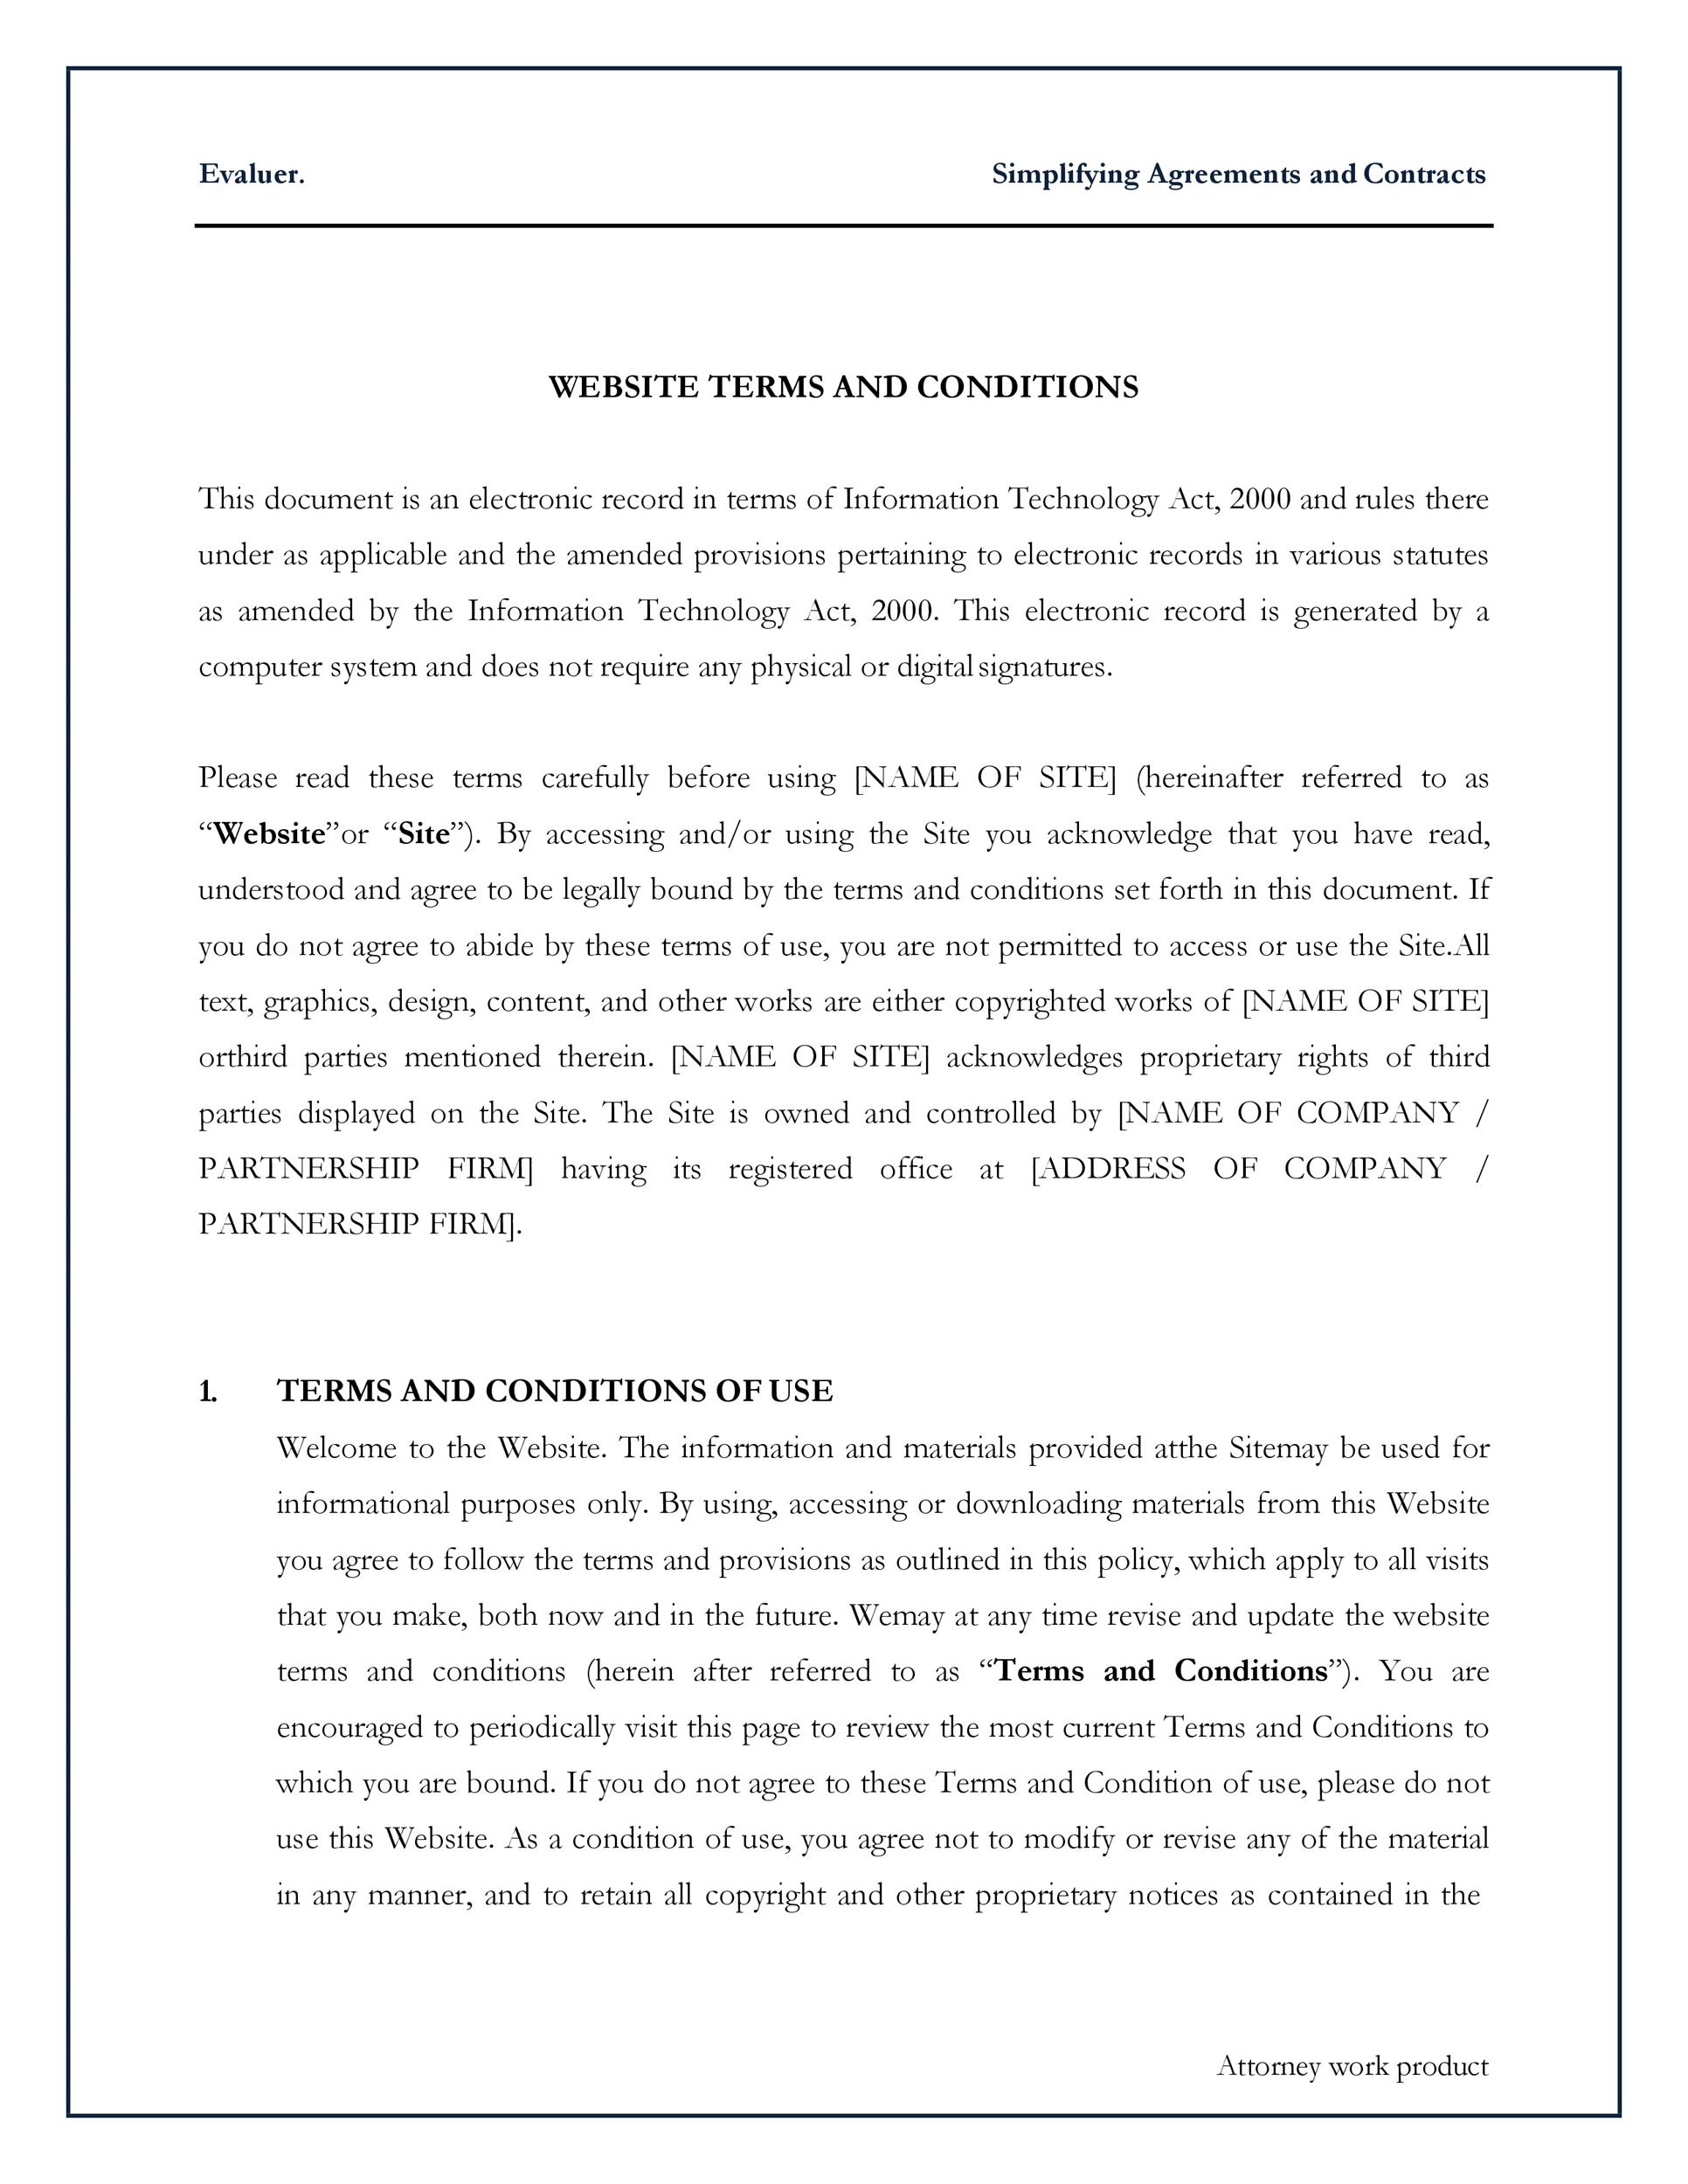 Free terms and conditions template 30